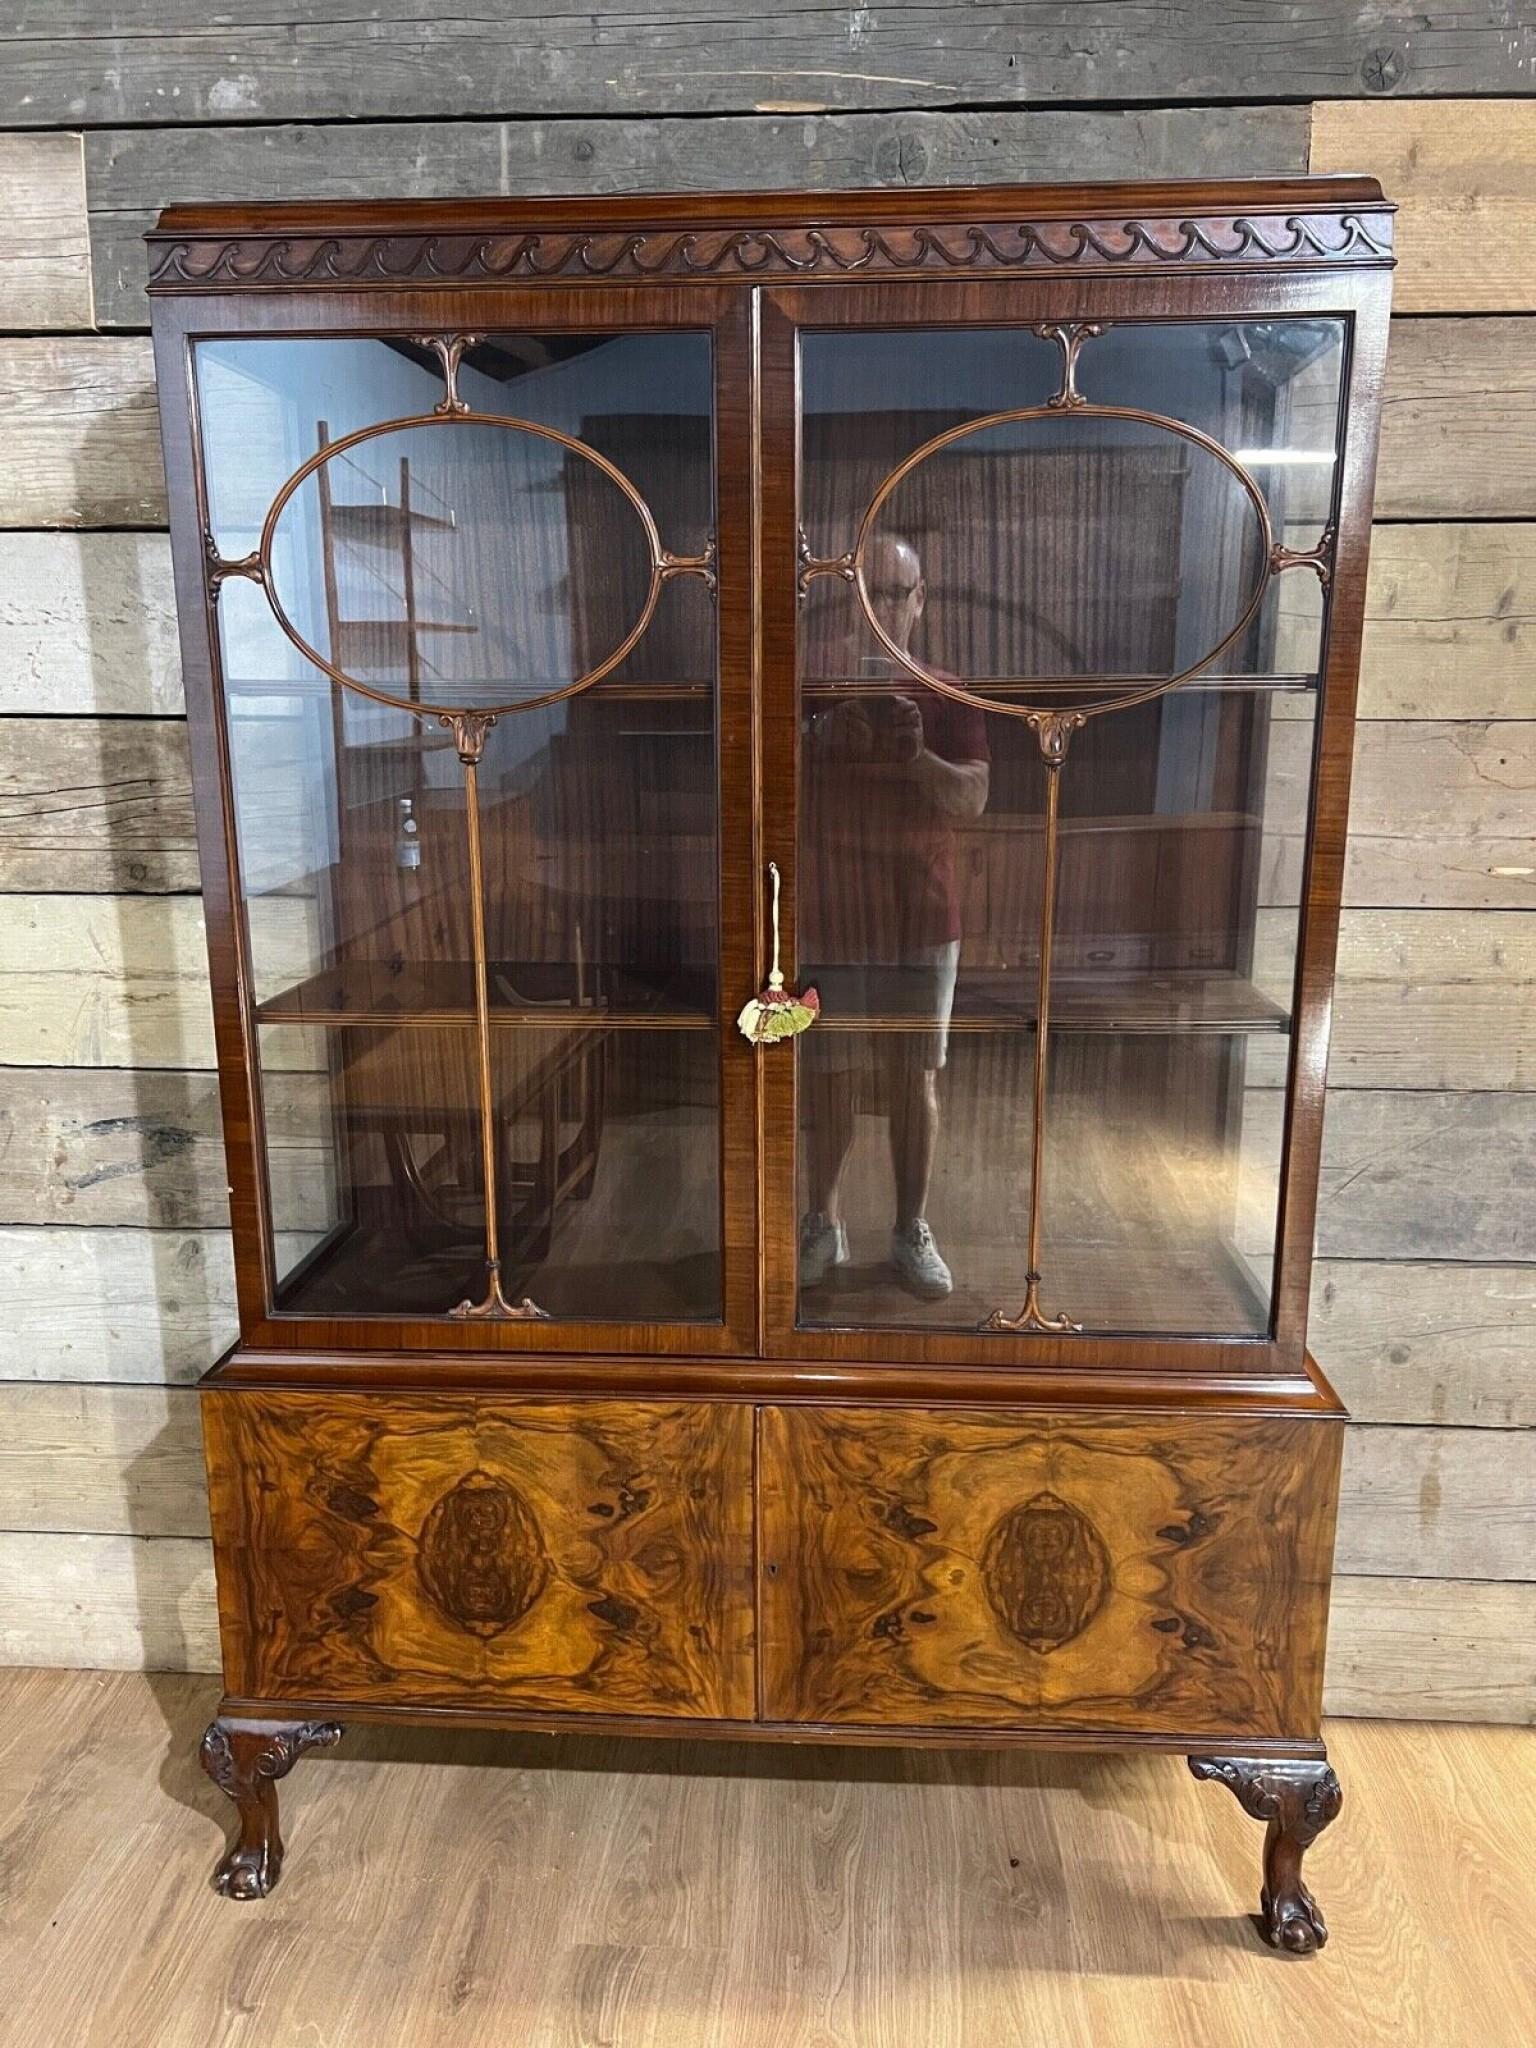 Antique bookcase / display cabinet in the Chippendale manner
Features distinctive ball and claw feet
Crafted from mahogany and walnut and circa 1900
Great patina to the walnut on this clean piece of antique furniture
Offered in great shape ready for